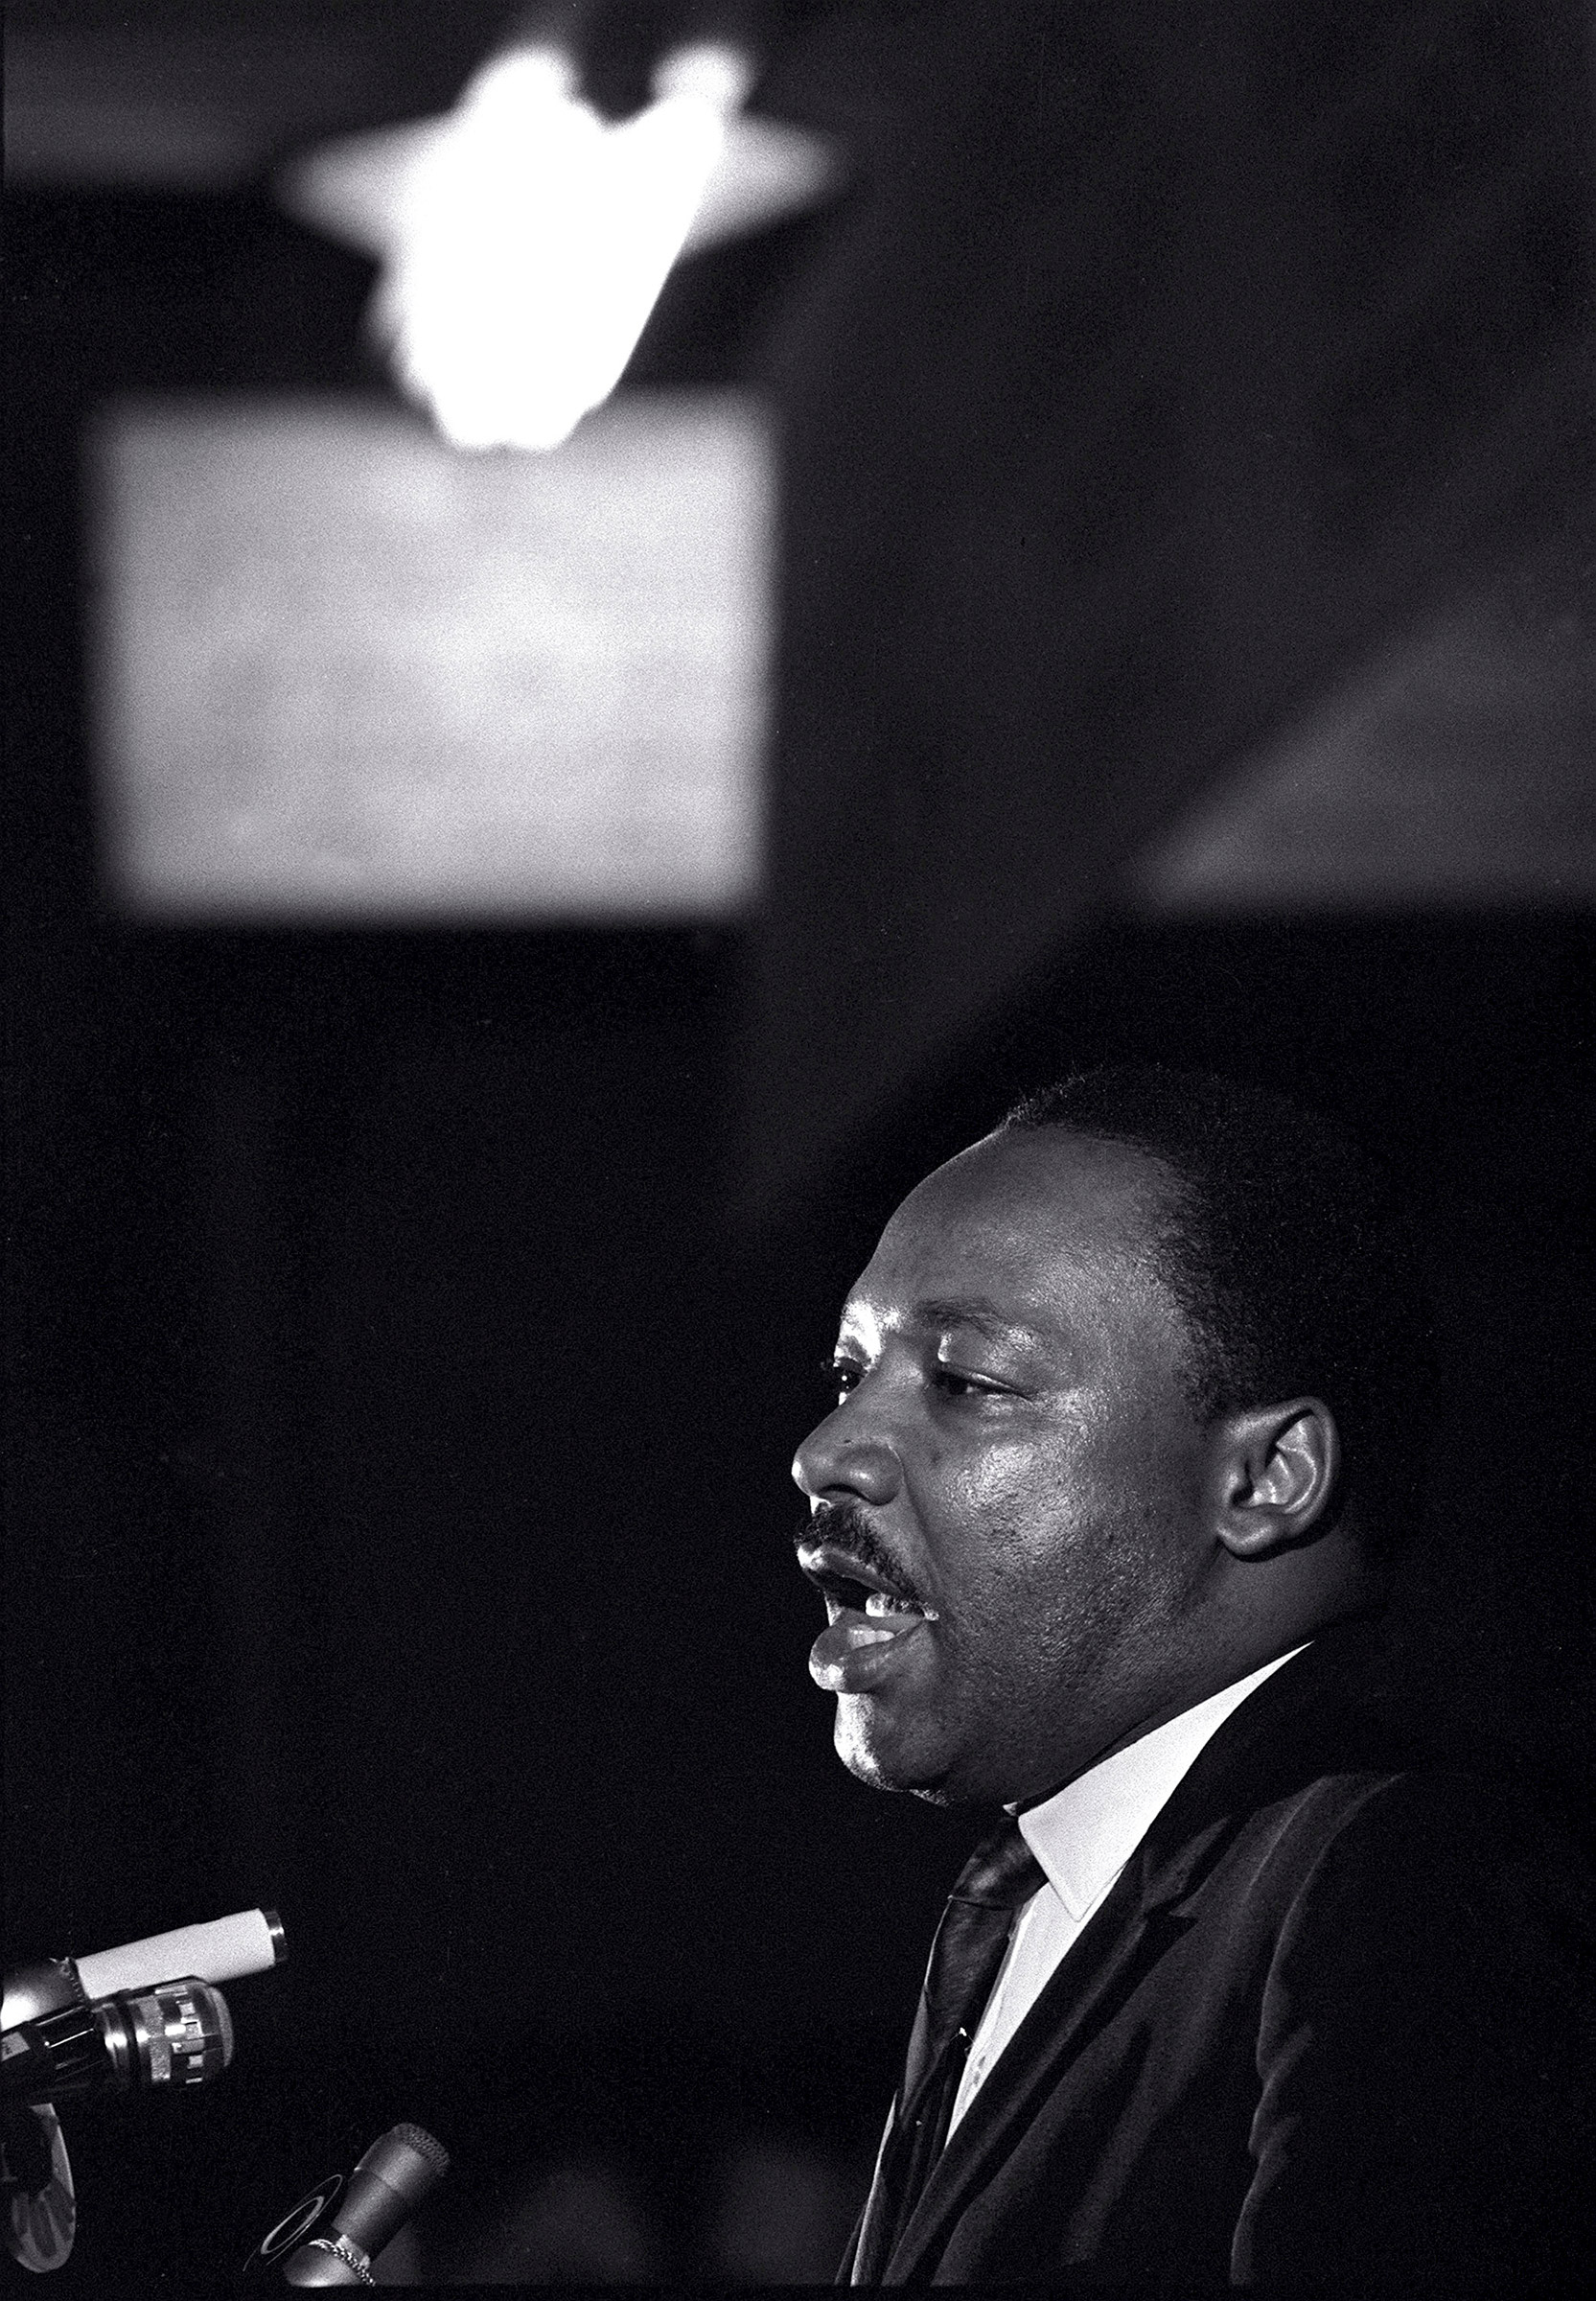 Dr. Martin Luther King Jr. delivers his "I’ve Been to the Mountaintop" speech at the Mason Temple in Memphis, Tenn., April 3, 1968.